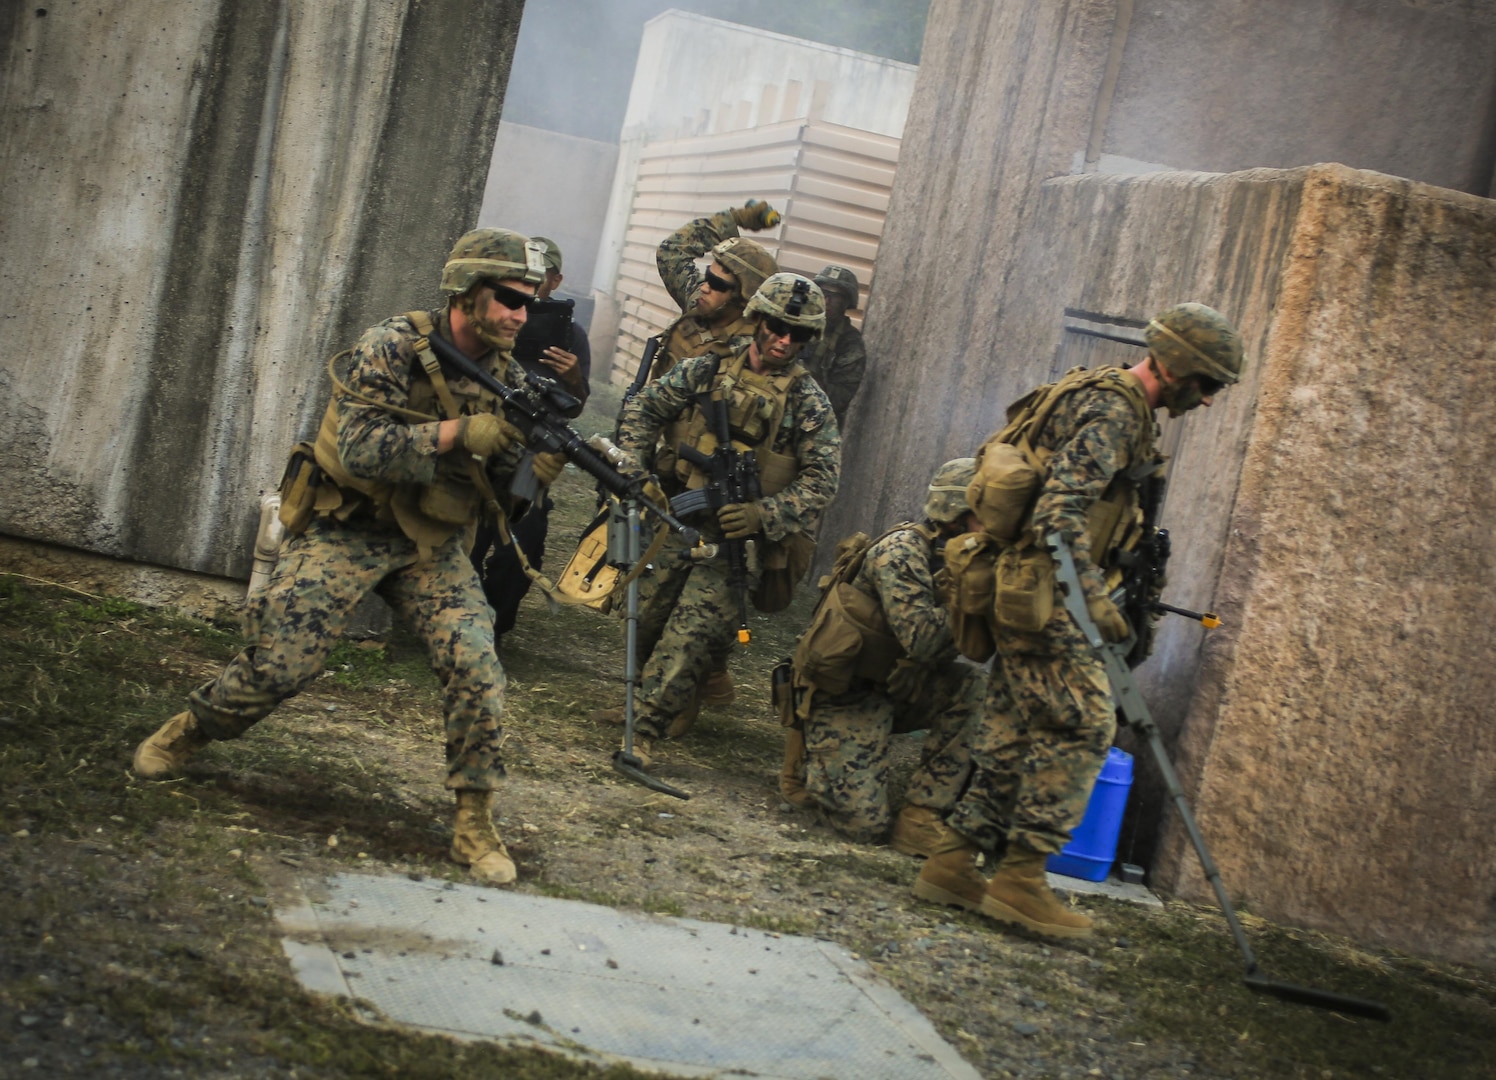 U.S. Marines with 2nd Battalion, 3rd Marines, clear for secondary improvised explosive devices during urban operations training at Marine Training Area Bellows, Hawaii, Sept. 28, 2017. Urban Operations is an opportunity to demonstrate the U.S. Marine Corps capability to component commanders and the Chief of Staff of the Armed Forces of the Philippines. (U.S. Marine Corps photo by Sgt. Wesley Timm)